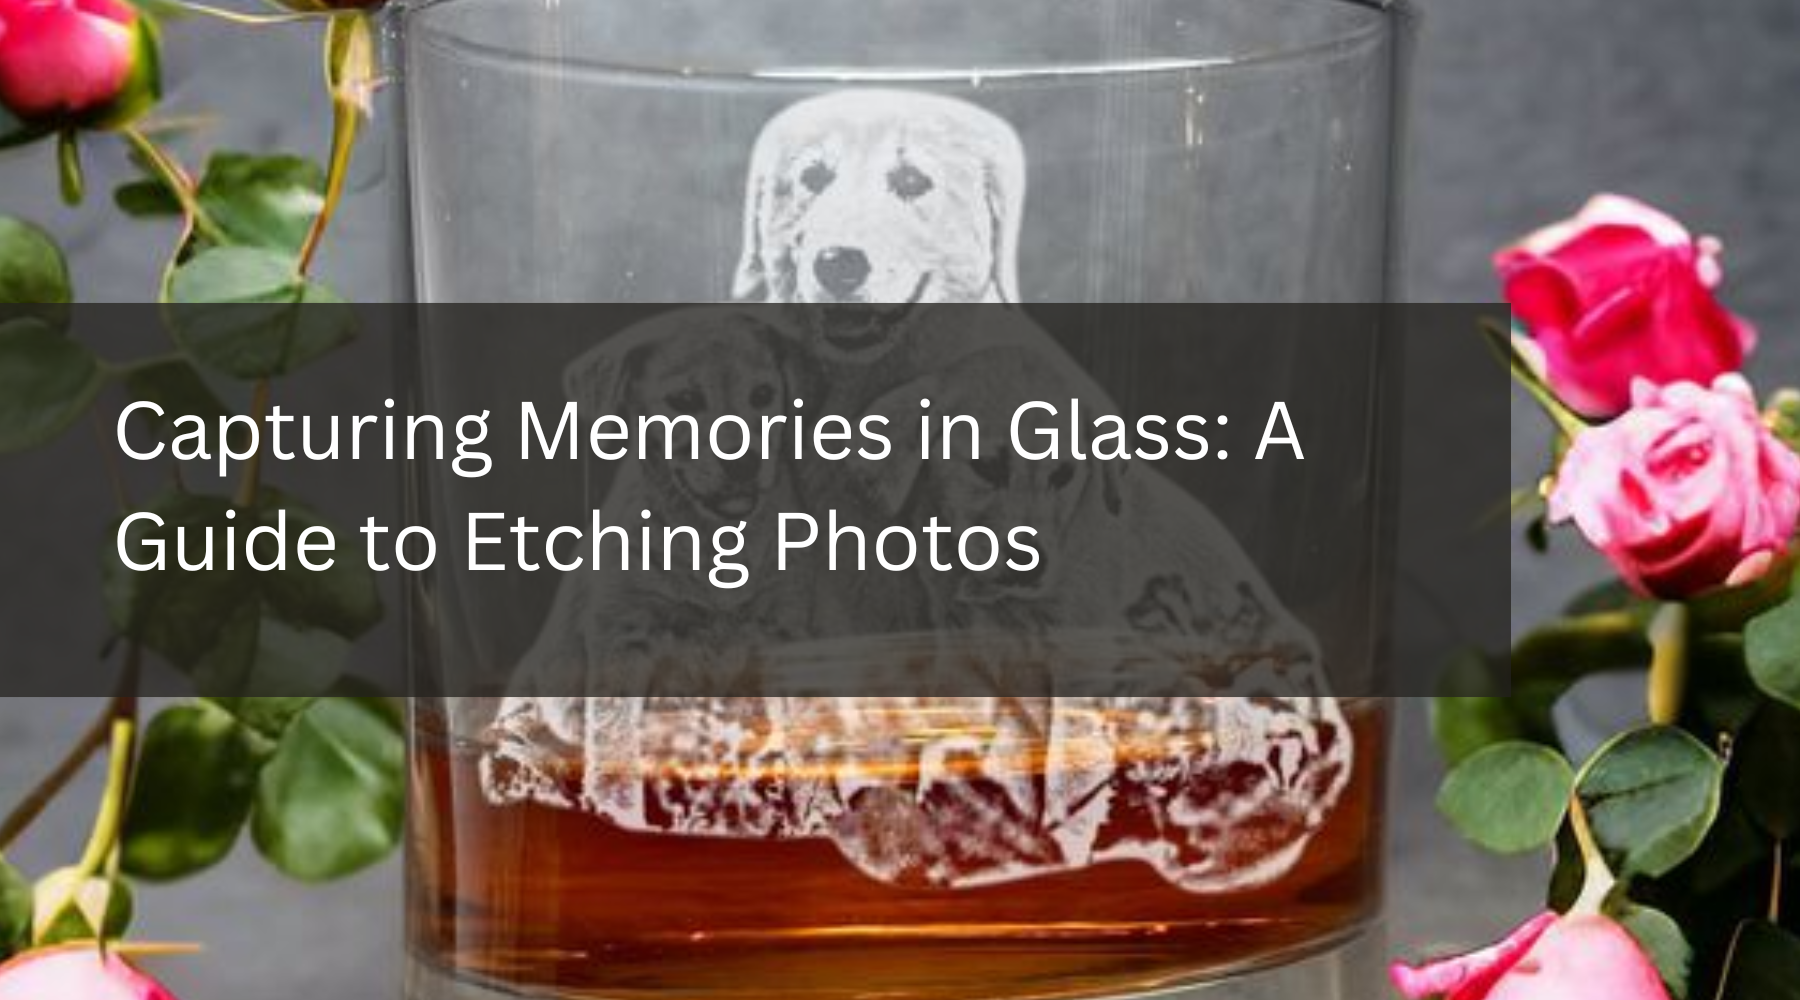 Capturing Memories in Glass: A Guide to Etching Photos